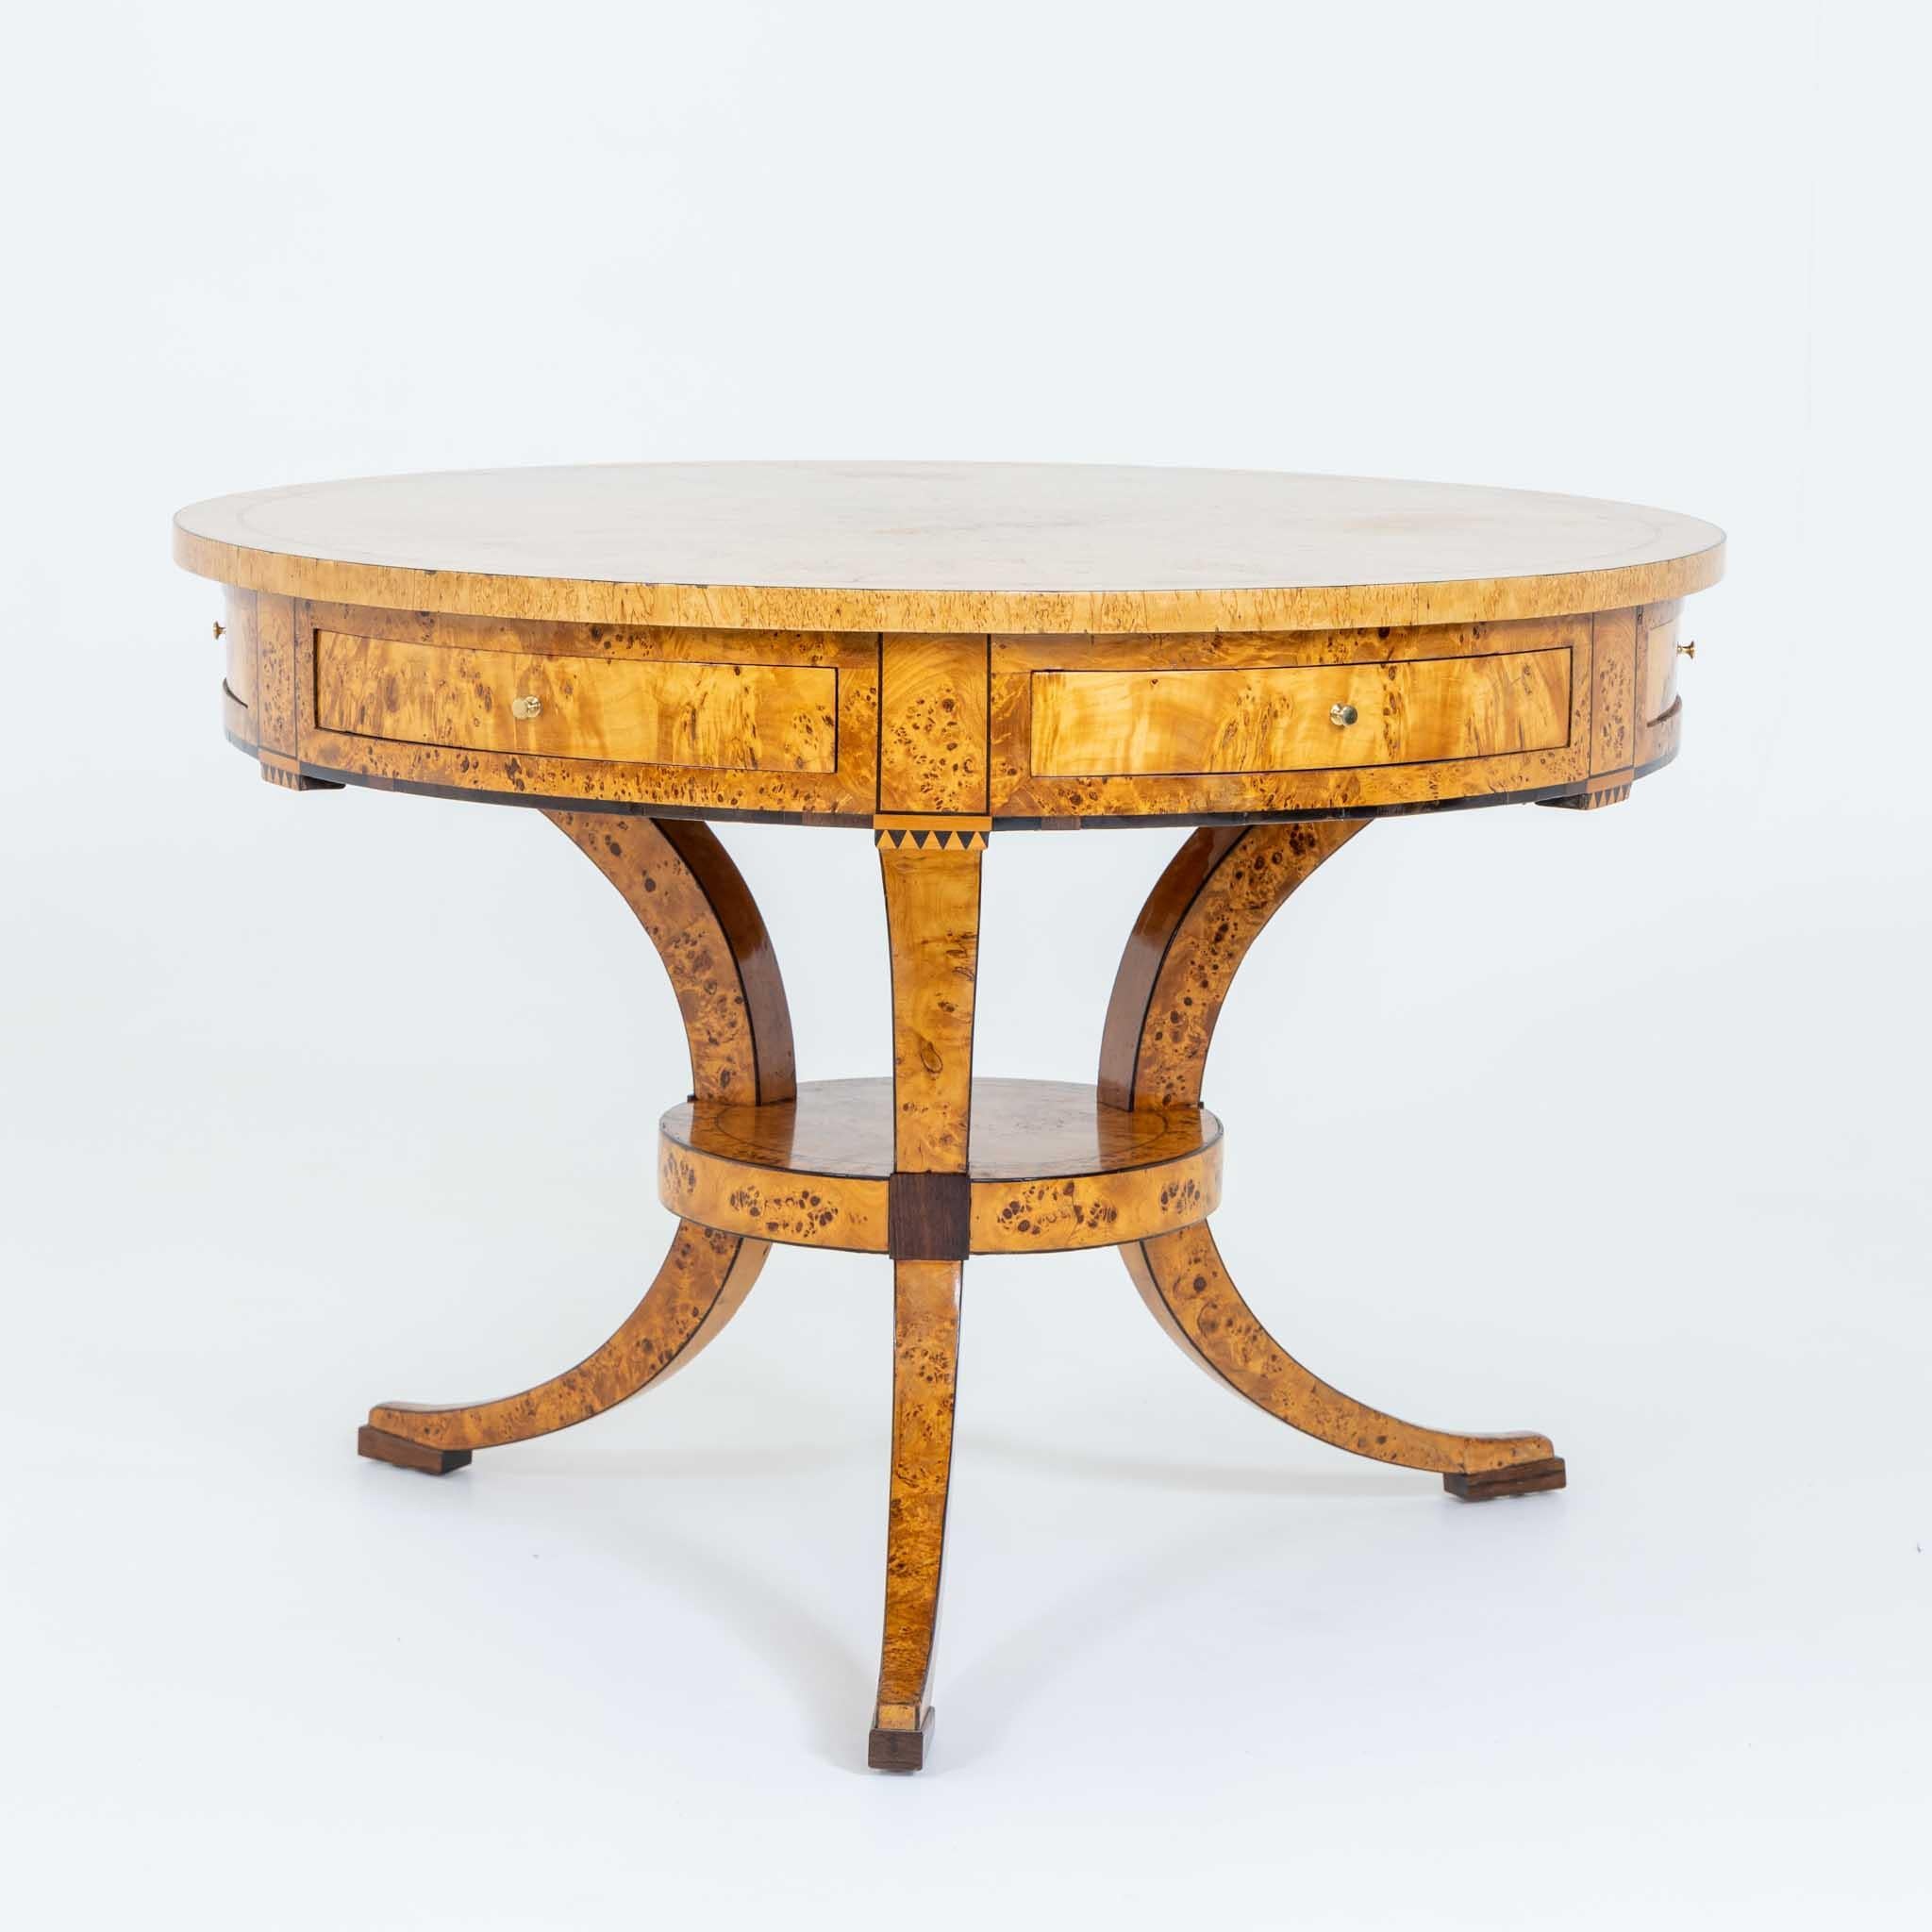 Polished Biedermeier Game Table in Birch, Baltic States, early 19th Century